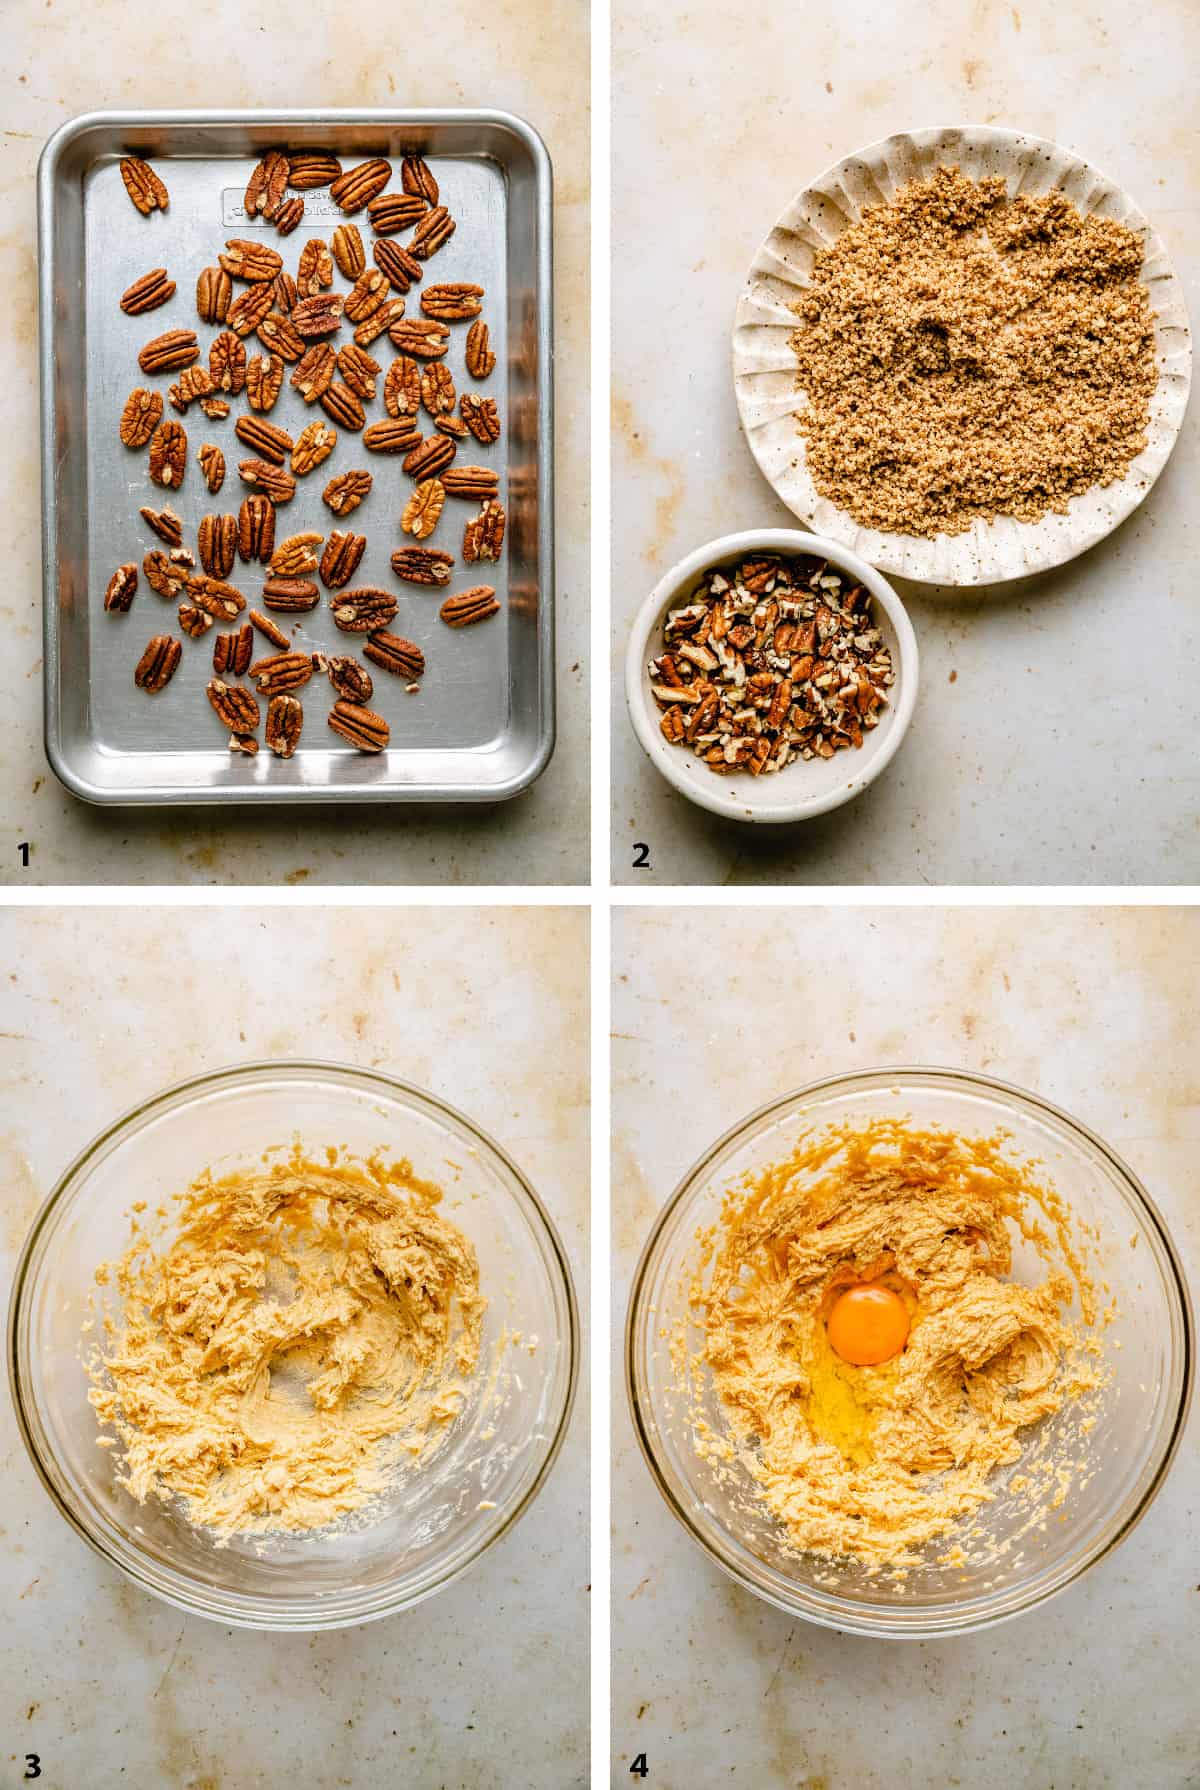 Steps of preparing the pecans and creaming butter sugar and eggs in a bowl.